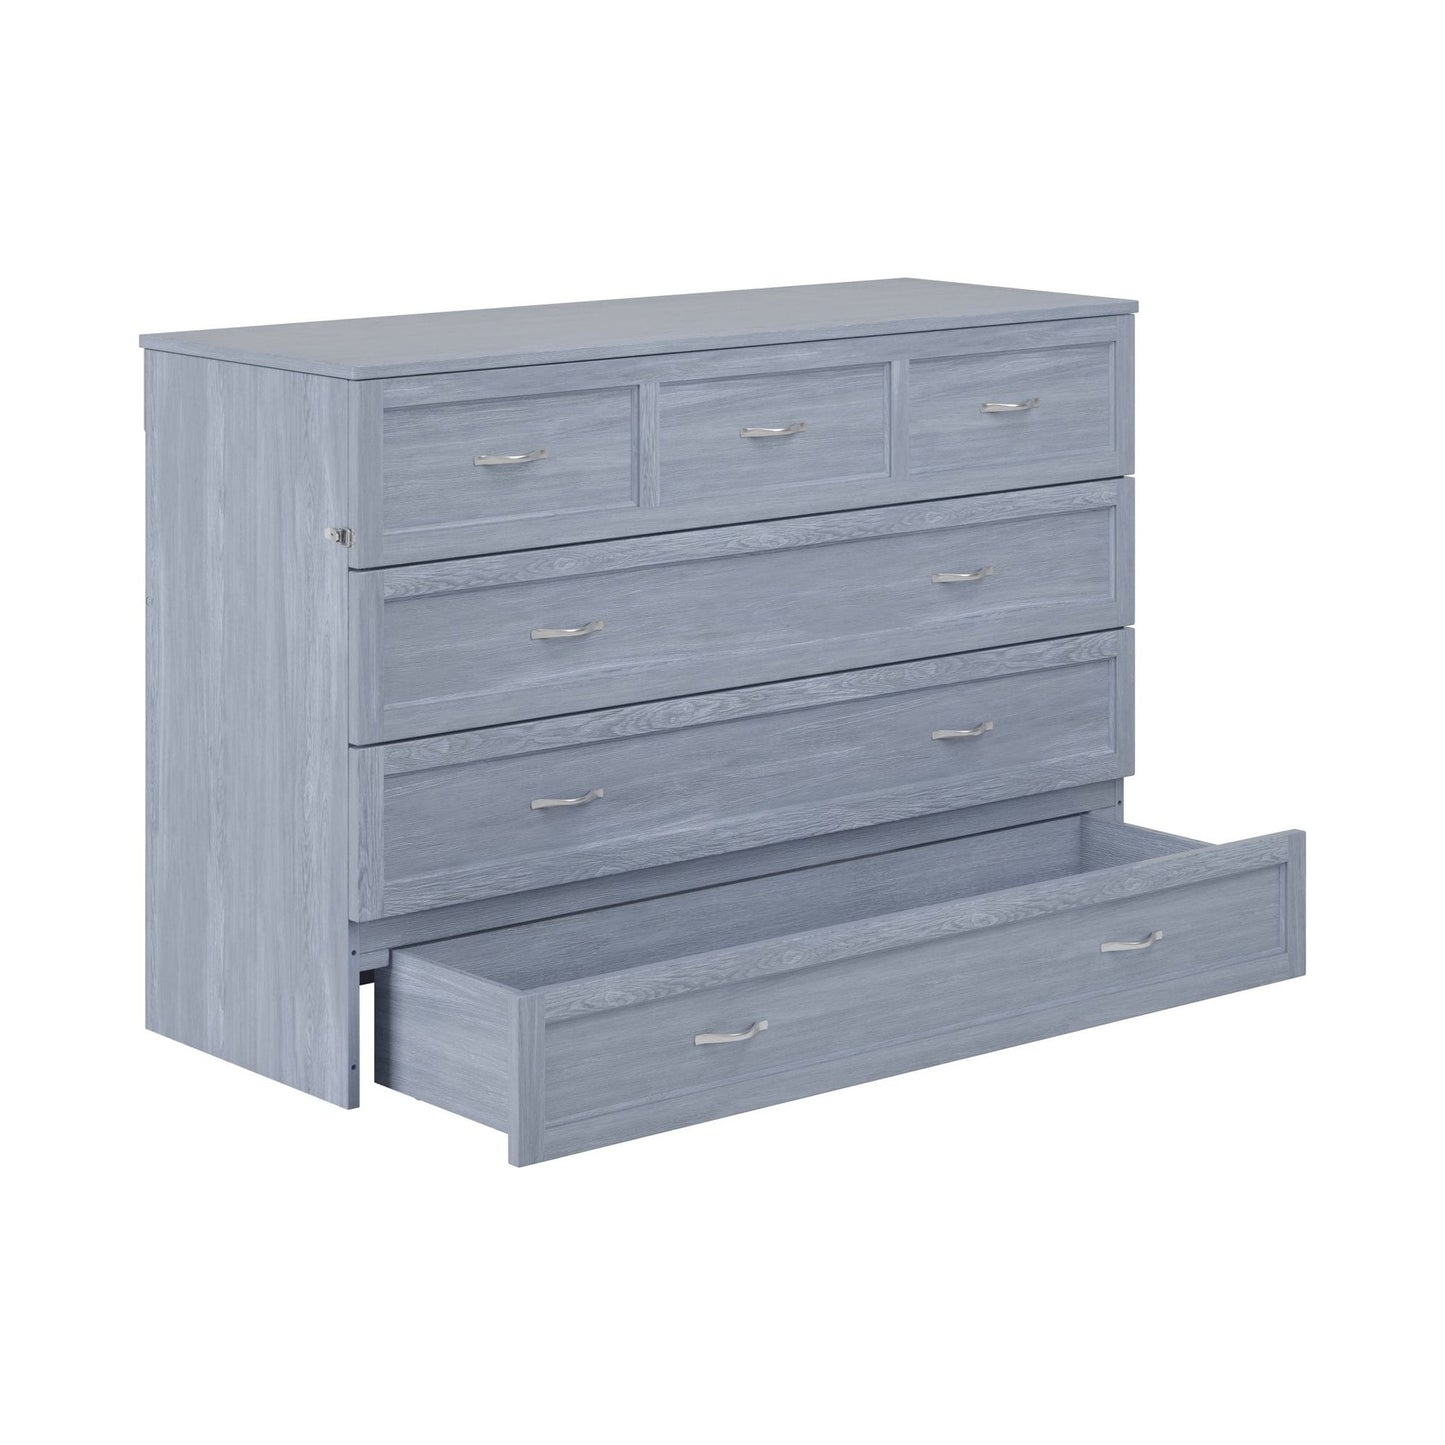 AFI Furnishings Northfield Queen Murphy Bed Chest Driftwood AC574148